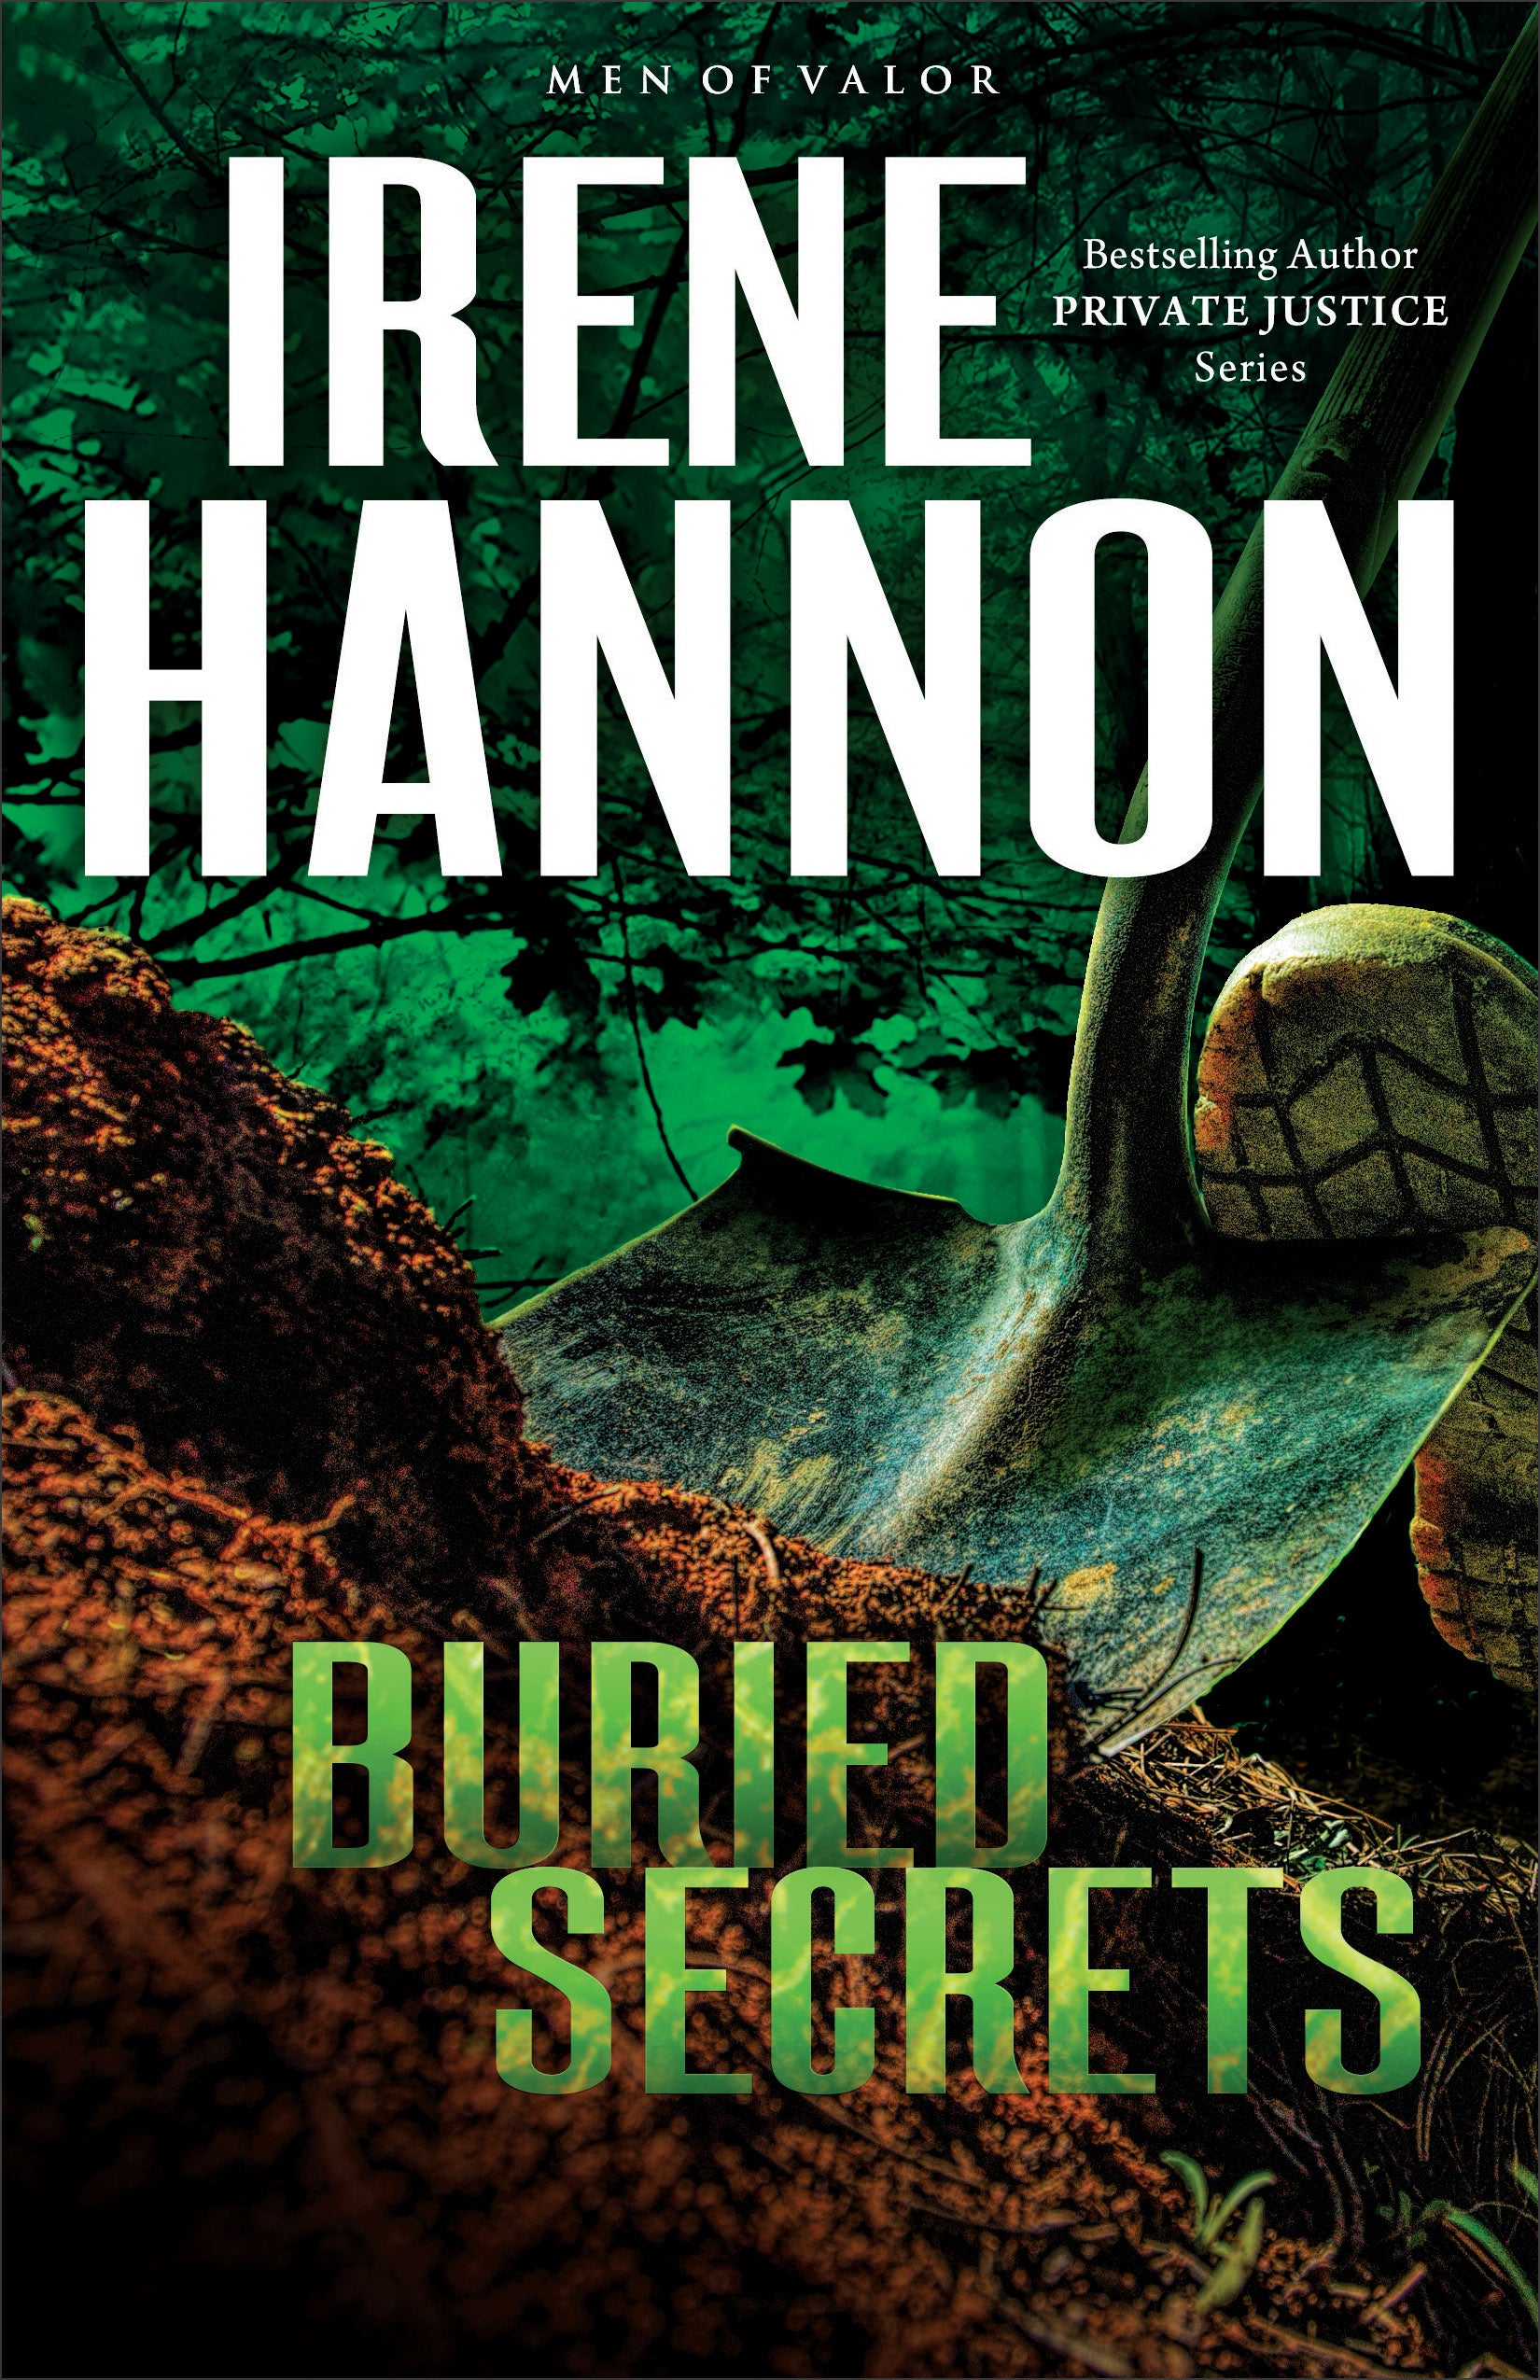 Image of Buried Secrets other